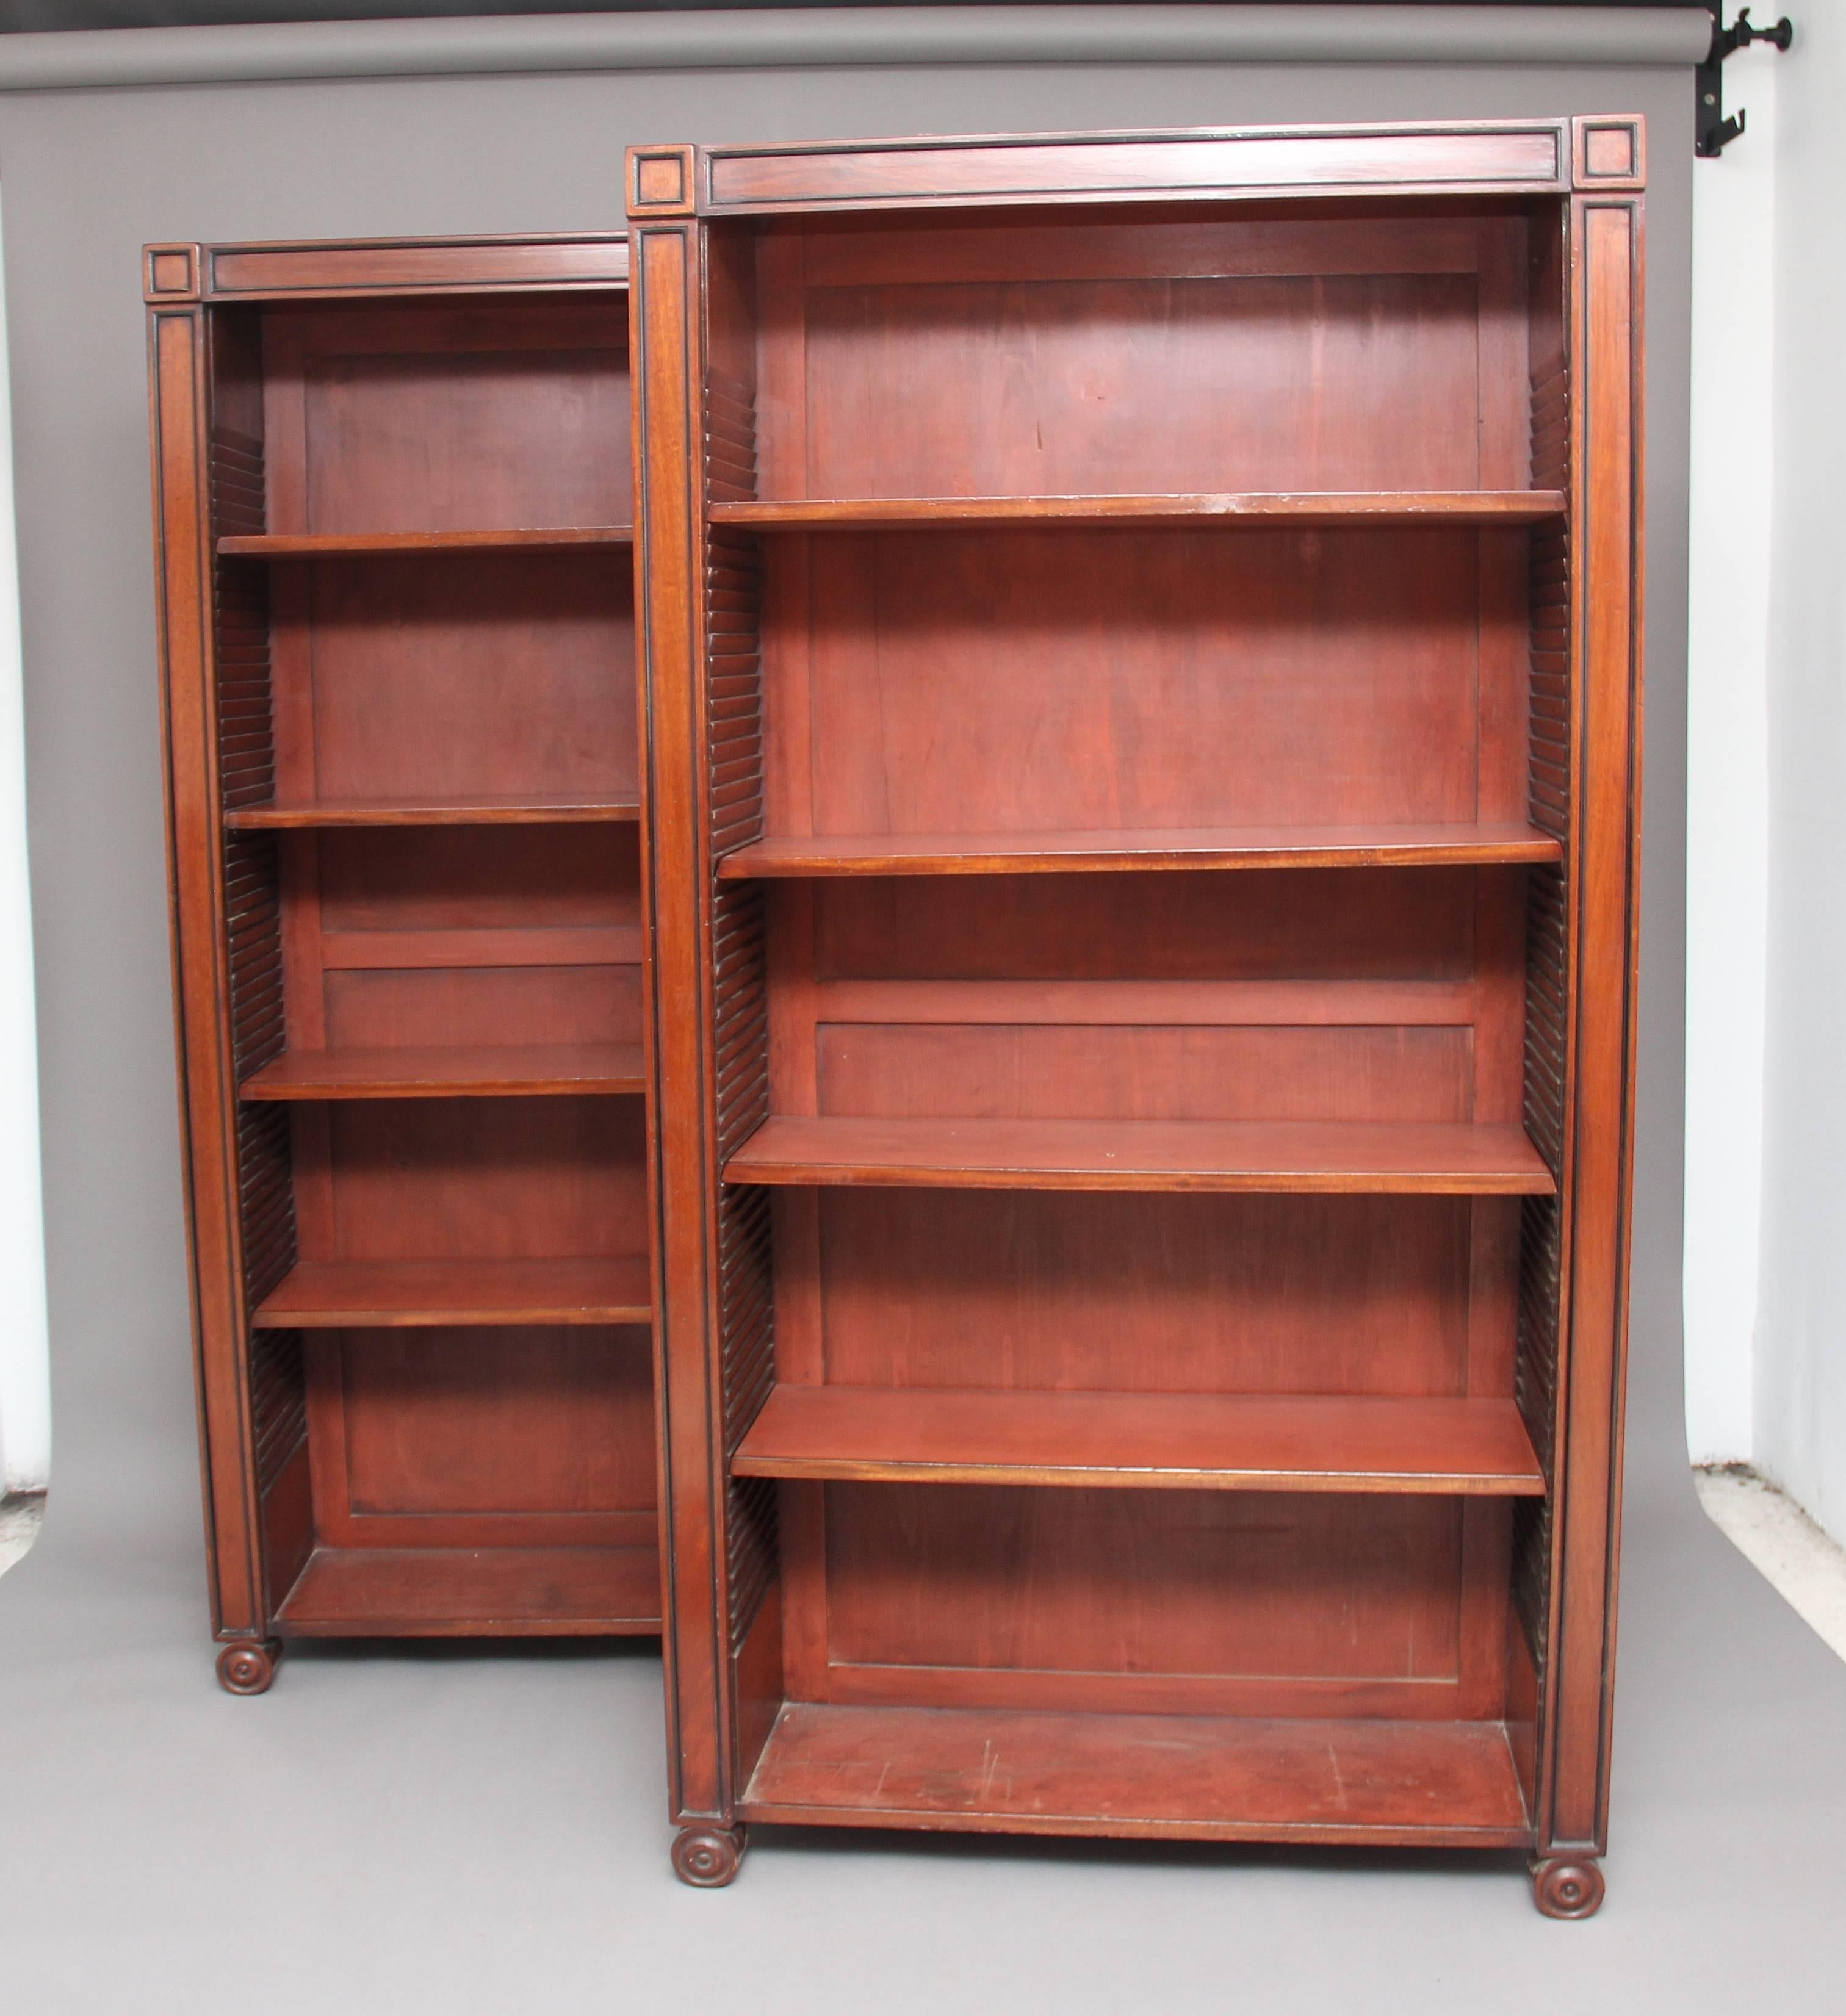 A nice pair of mid-20th century Regency style mahogany open bookcases, each bookcase having four adjustable shelves inside, decorated with ebonised moulded pilasters supported on scroll feet, circa 1960.
 